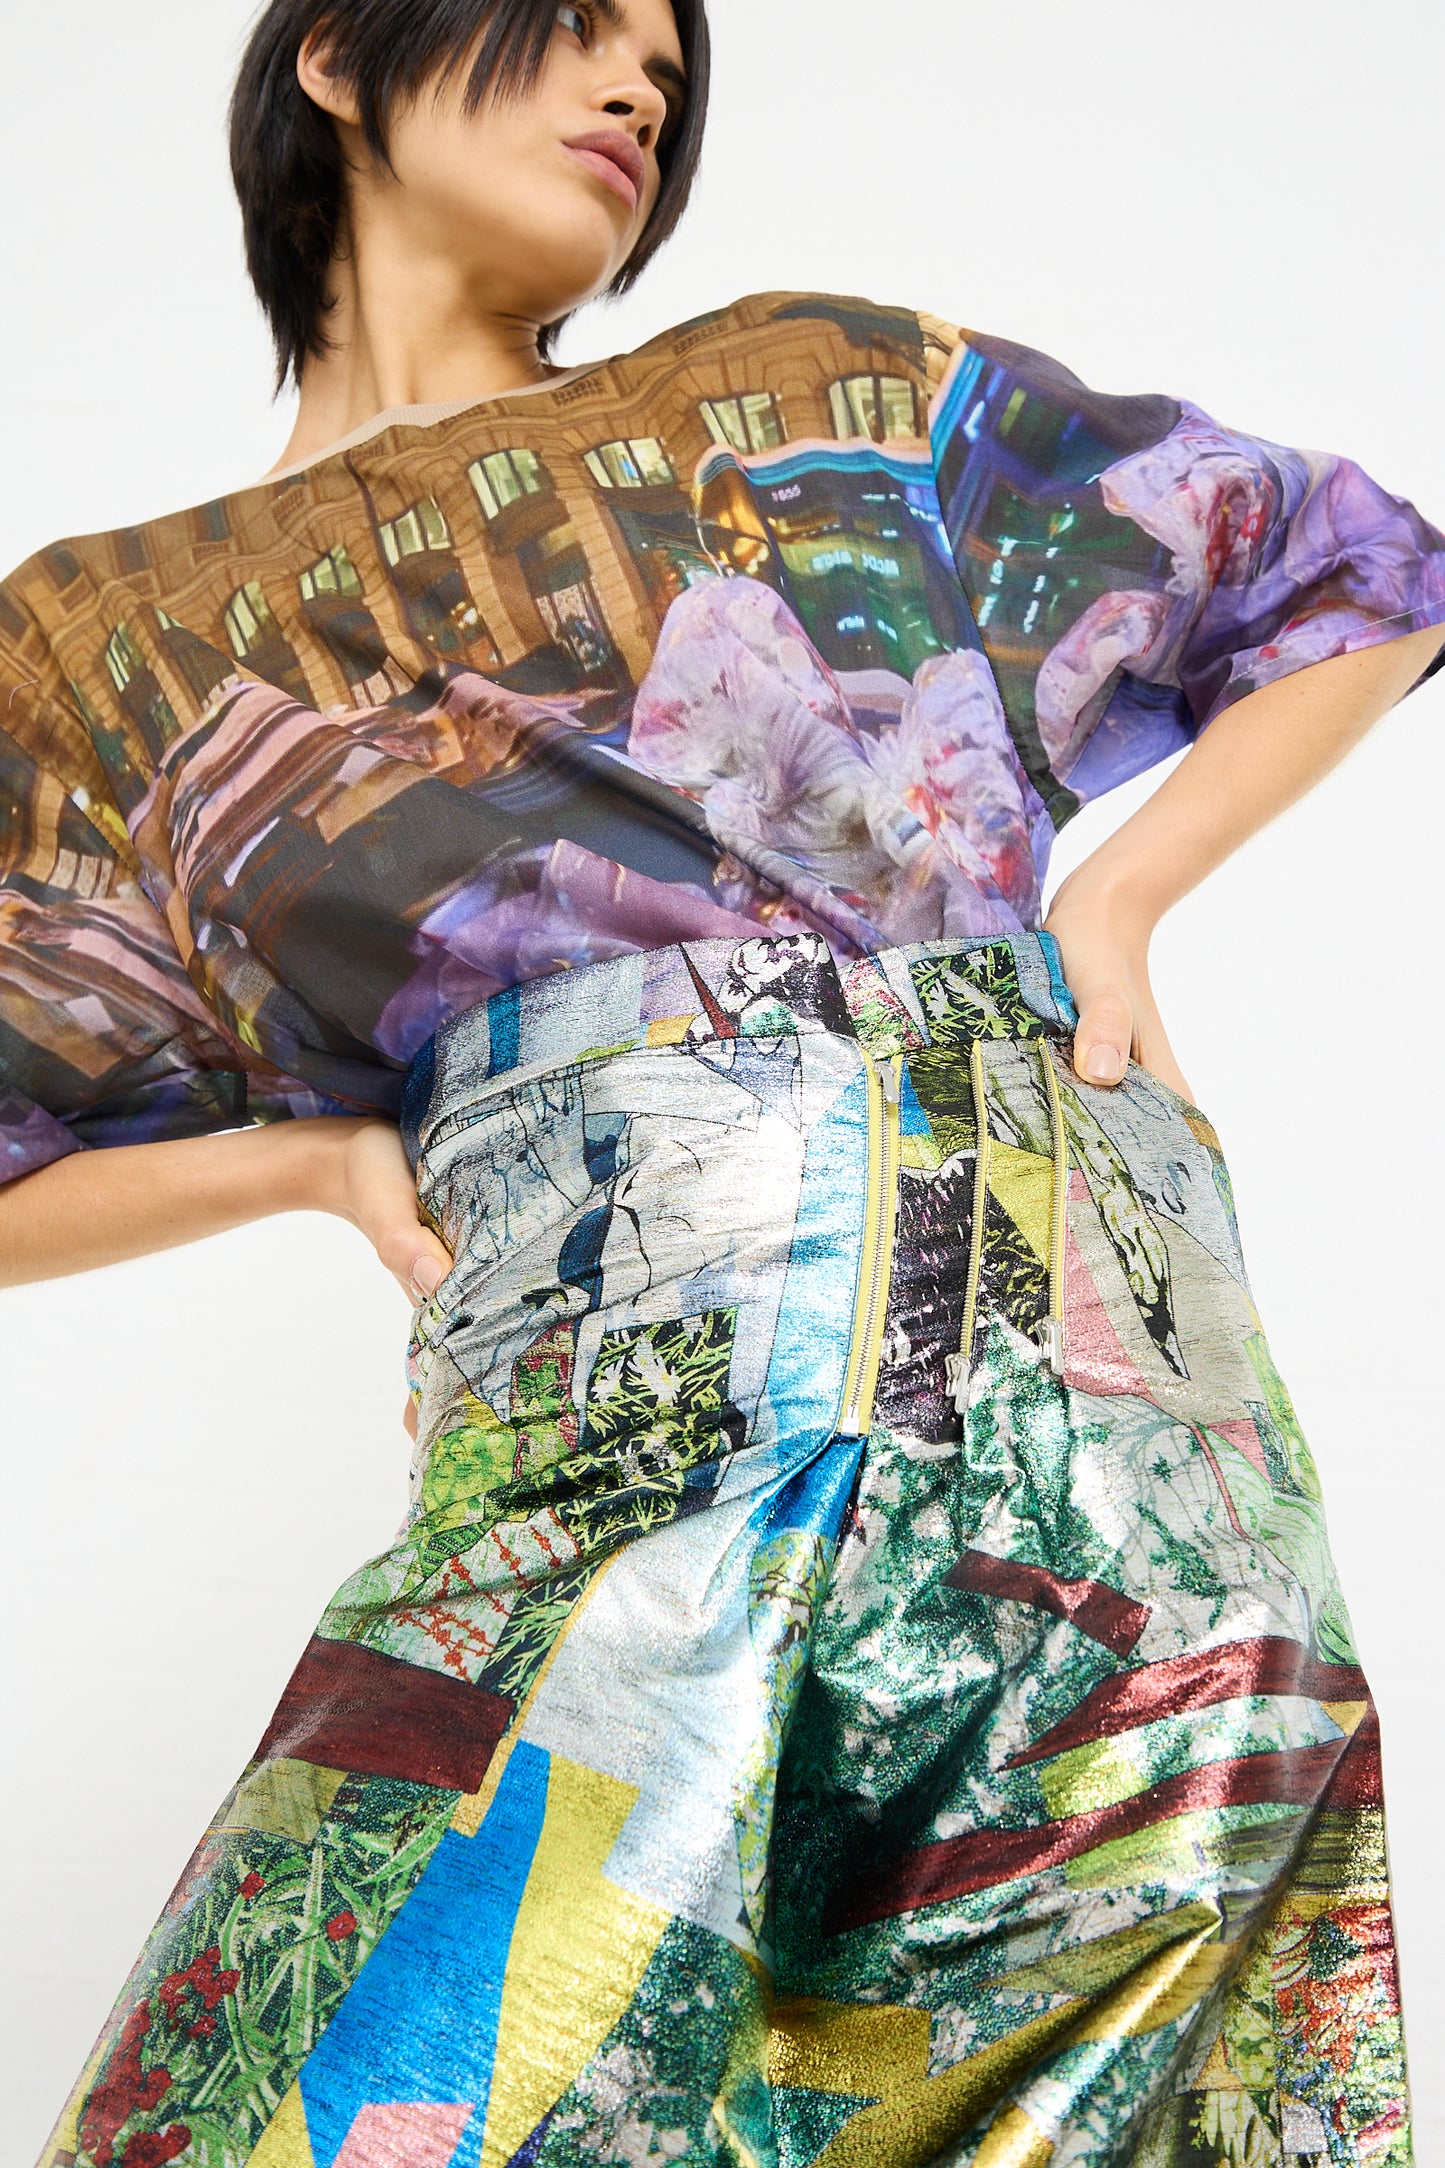 A person modeling a colorful, graphic print No. 77 SMLXL Skirt in Lurex Multicolor with an urban and floral design by Bless brand.